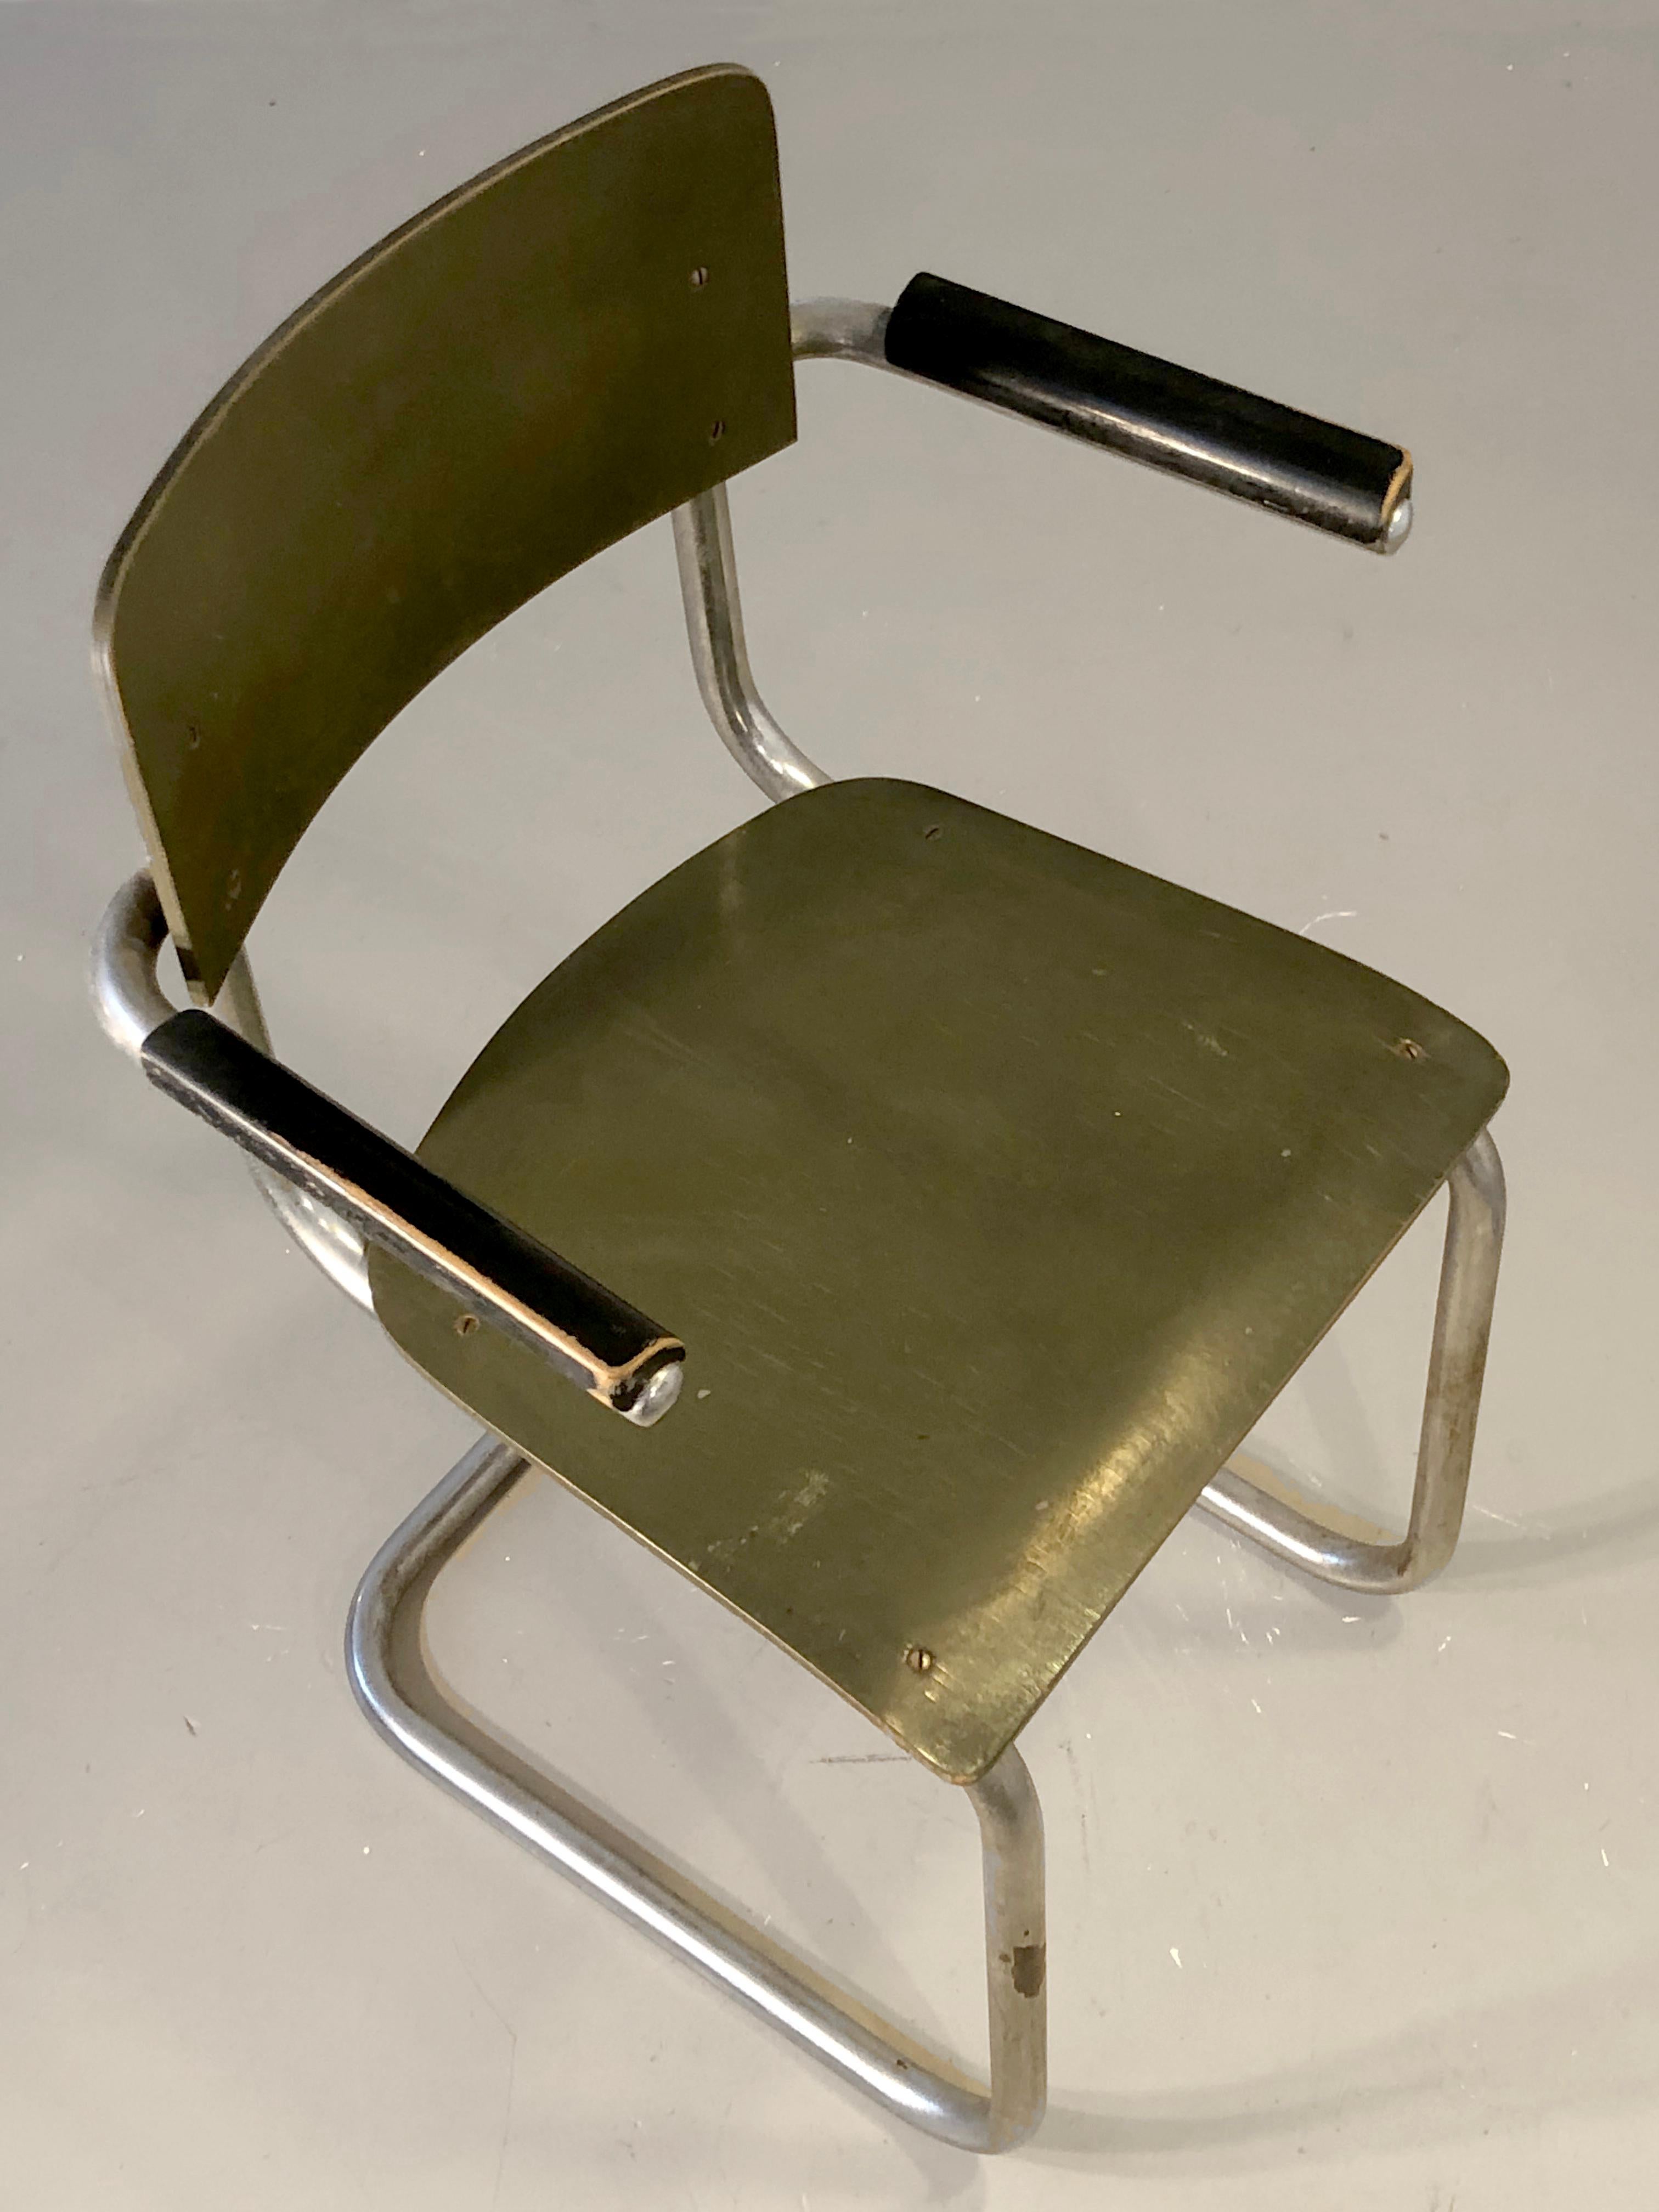 An Early MODERNIST BAUHAUS CHAIR by MART STAM for MAUSER WERKE, Germany 1930 For Sale 7